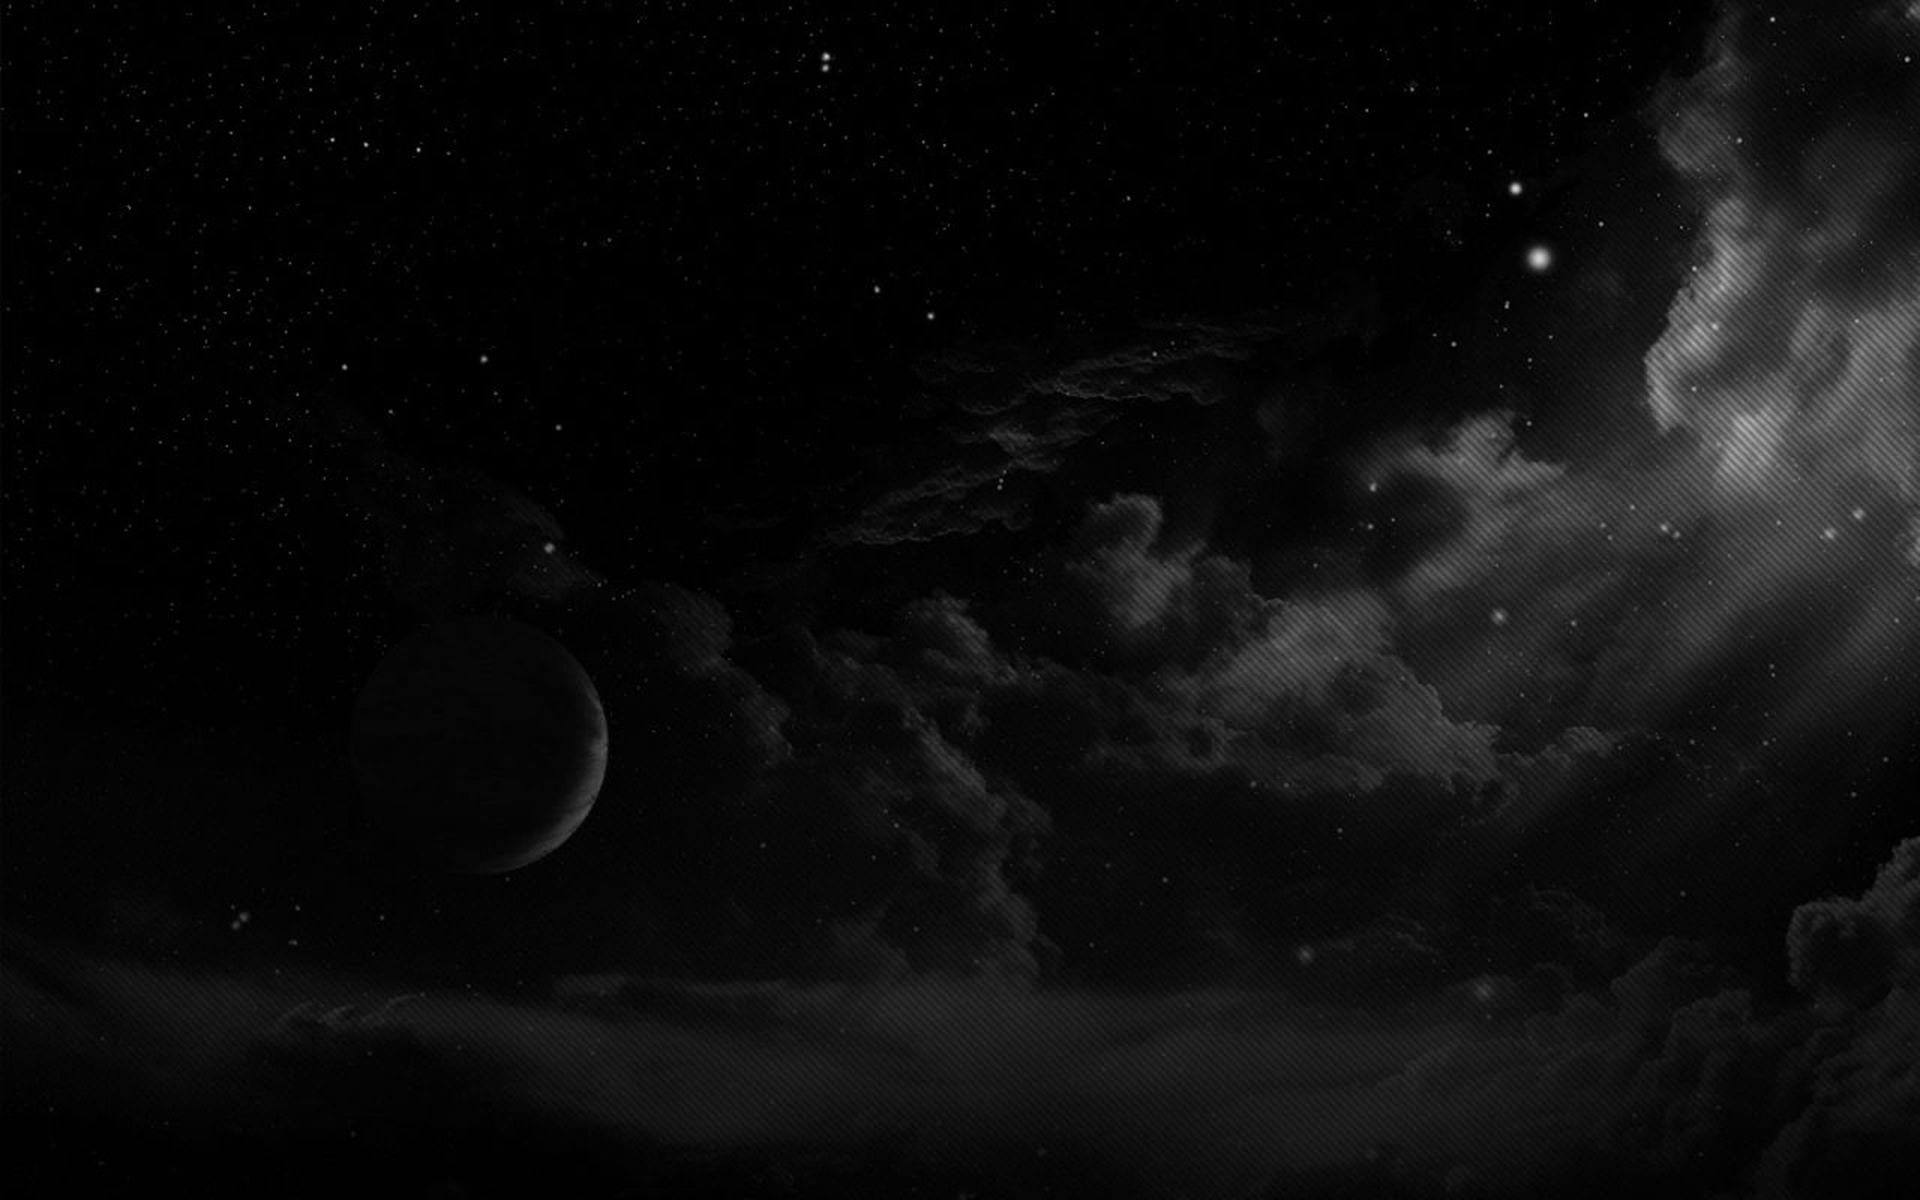 A black and white image of a planet in space. - Night